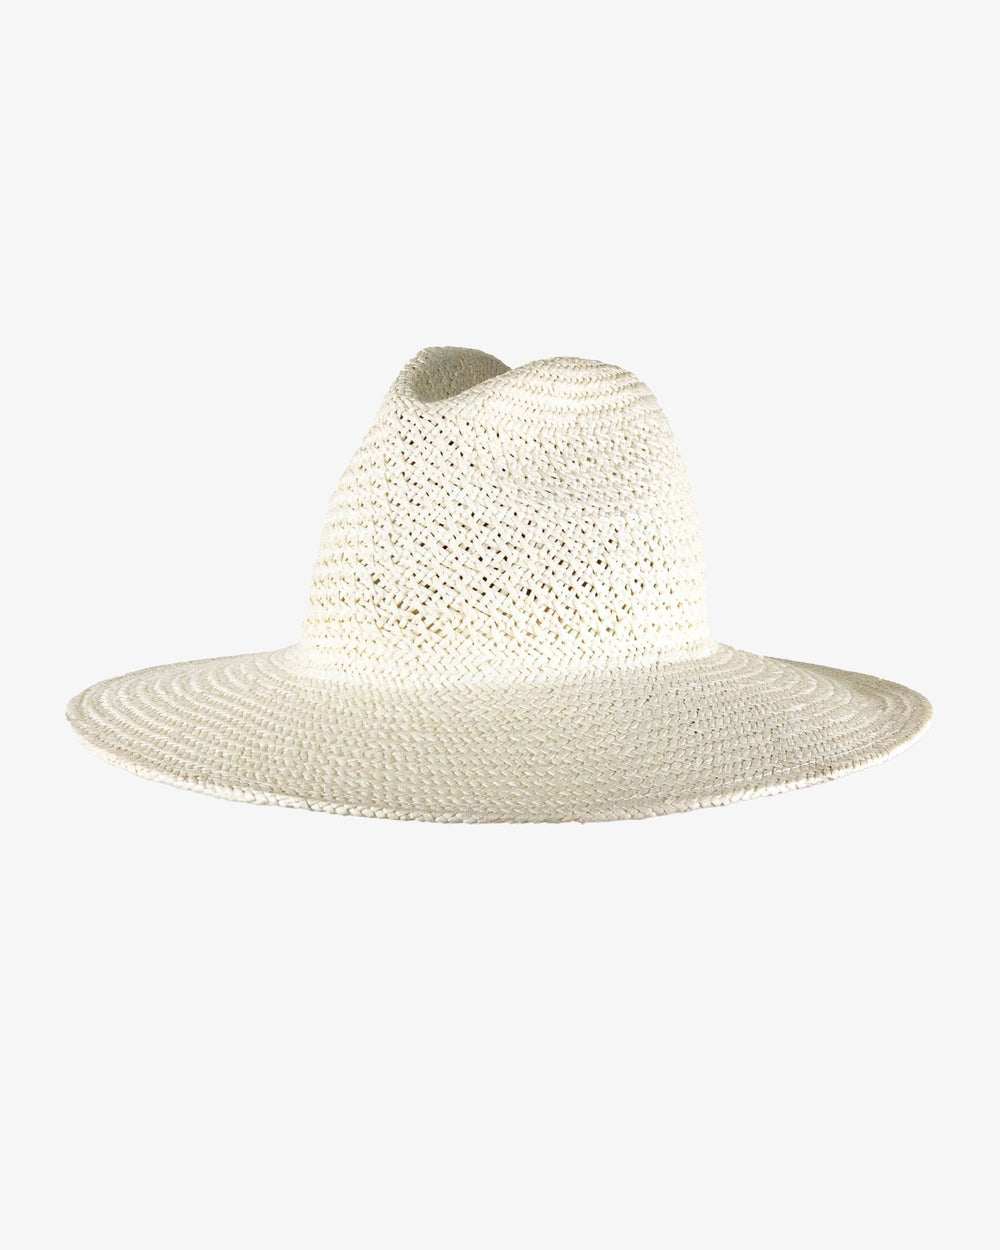 The front view of the Southern Tide Packable Straw Beach Hat by Southern Tide - White